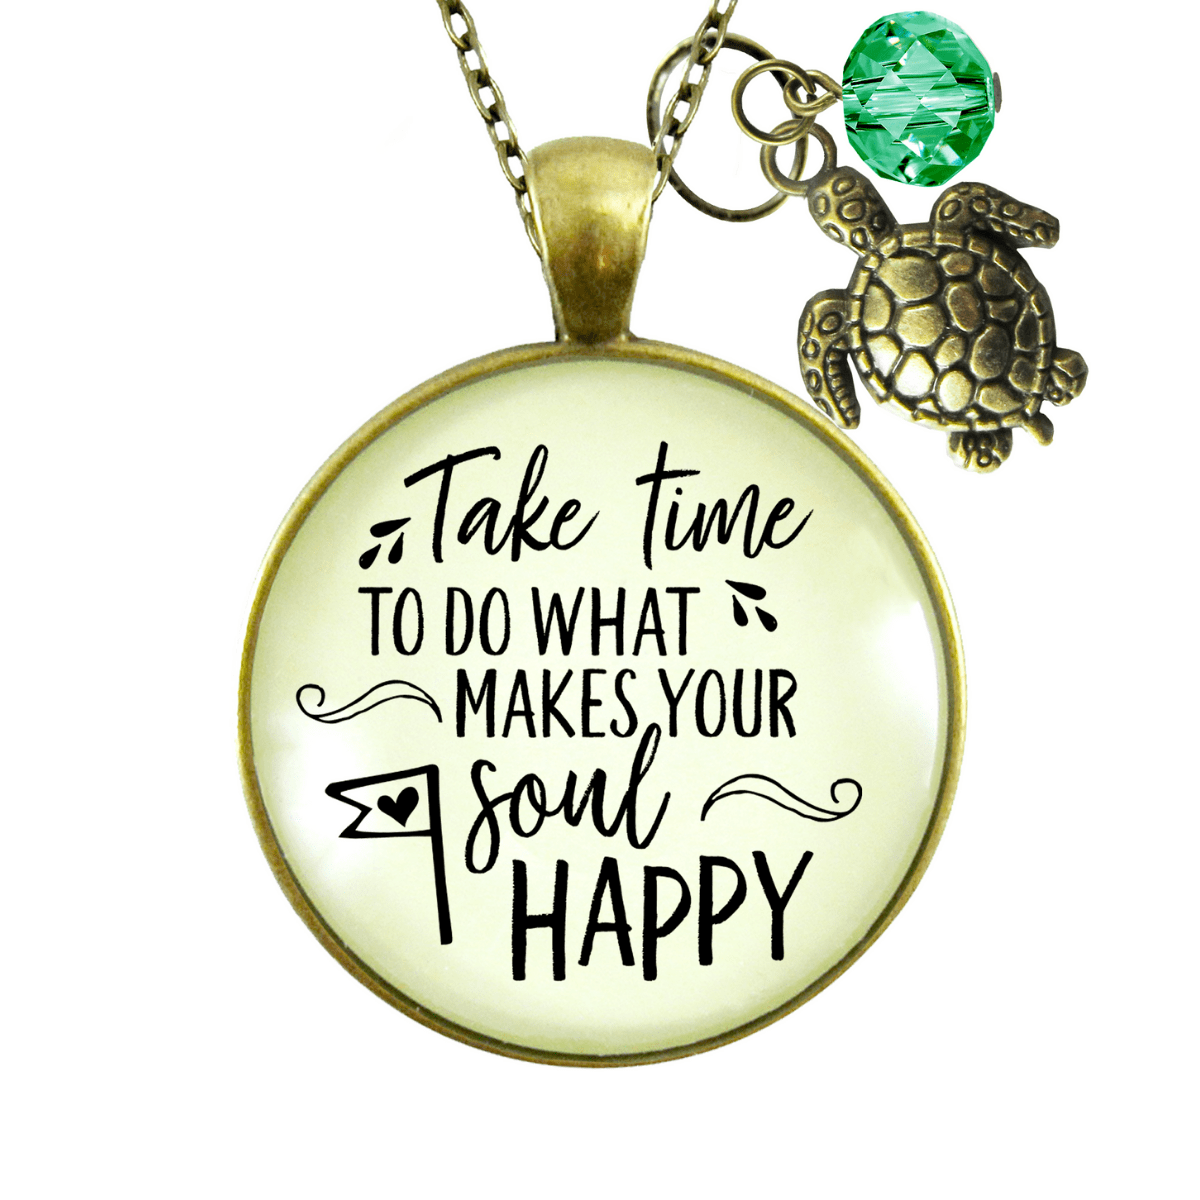 Gutsy Goodness Turtle Necklace Take Time to Make Soul Happy Life Theme Jewelry - Gutsy Goodness Handmade Jewelry;Turtle Necklace Take Time To Make Soul Happy Life Theme Jewelry - Gutsy Goodness Handmade Jewelry Gifts